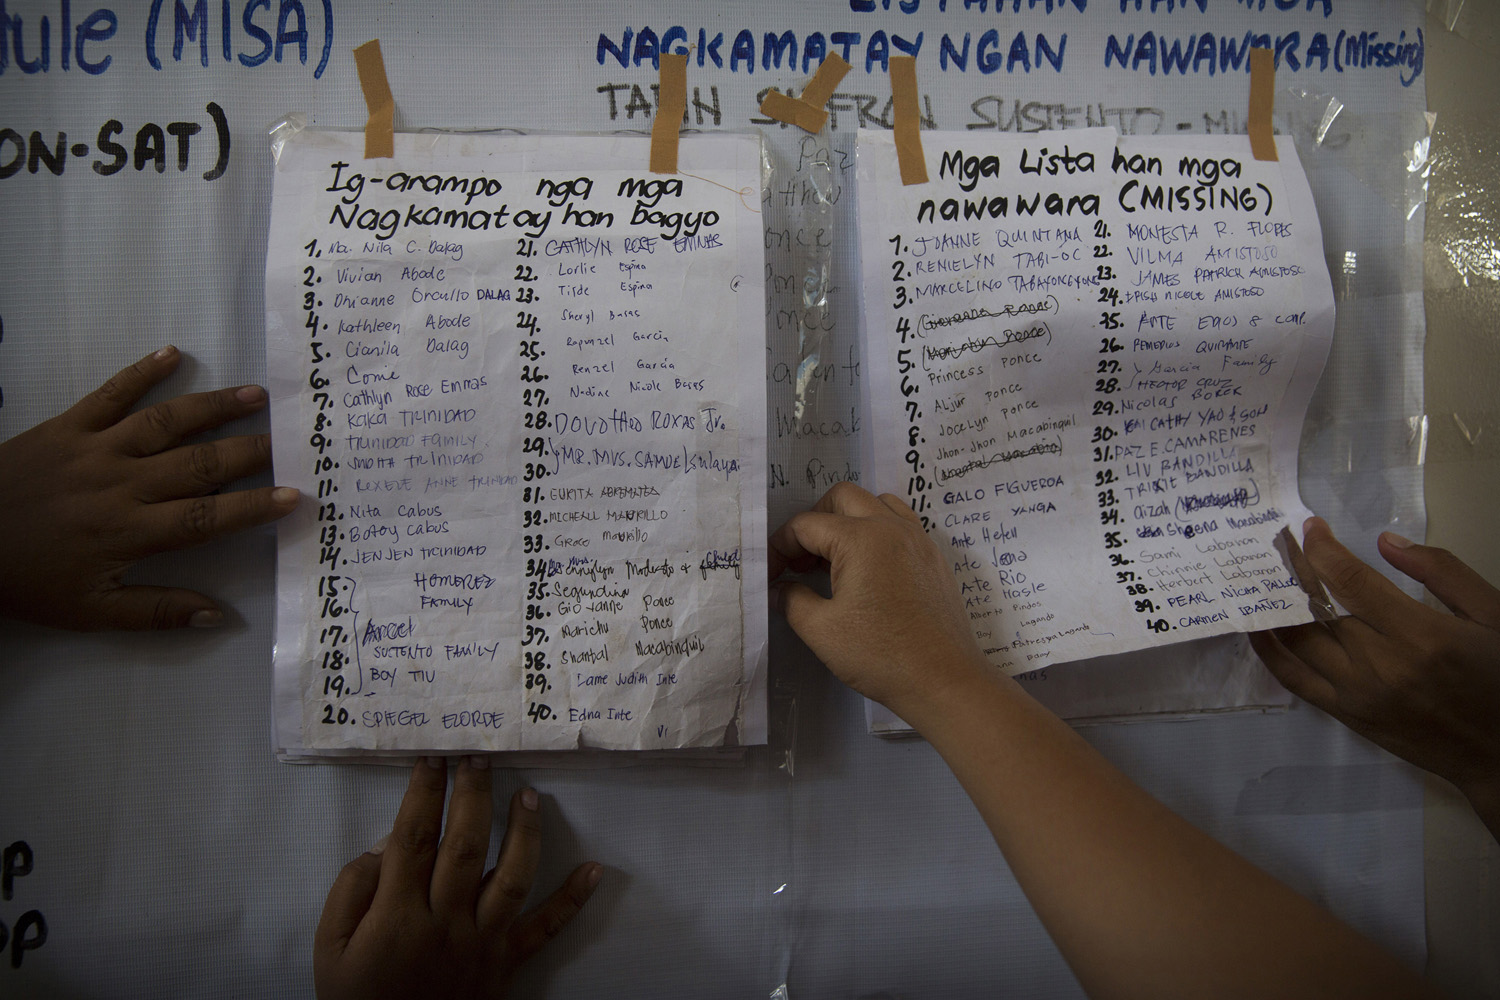 People search through lists of missing persons lost in Haiyan Typhoon in Tacloban, The Philippines on November 17, 2013.